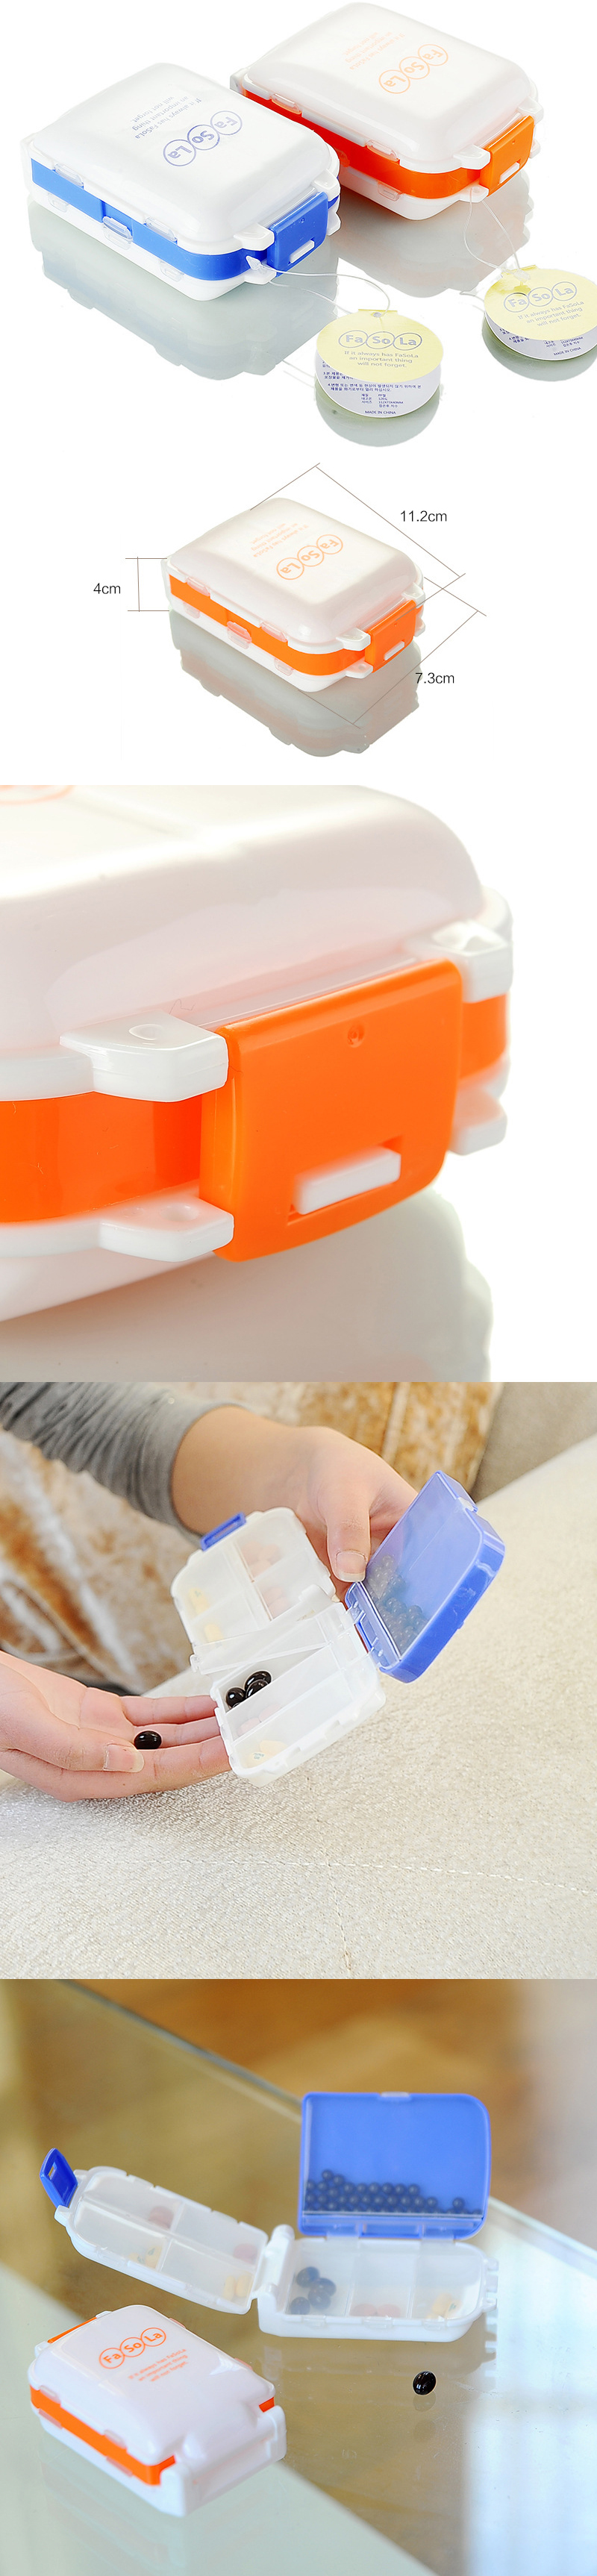 IPReereg-7-Days-Weekly-Pill-Case-Degradable-Portable-Mini-Partition-Travel-Outdoor-Three-Stage-Pill--1383791-1